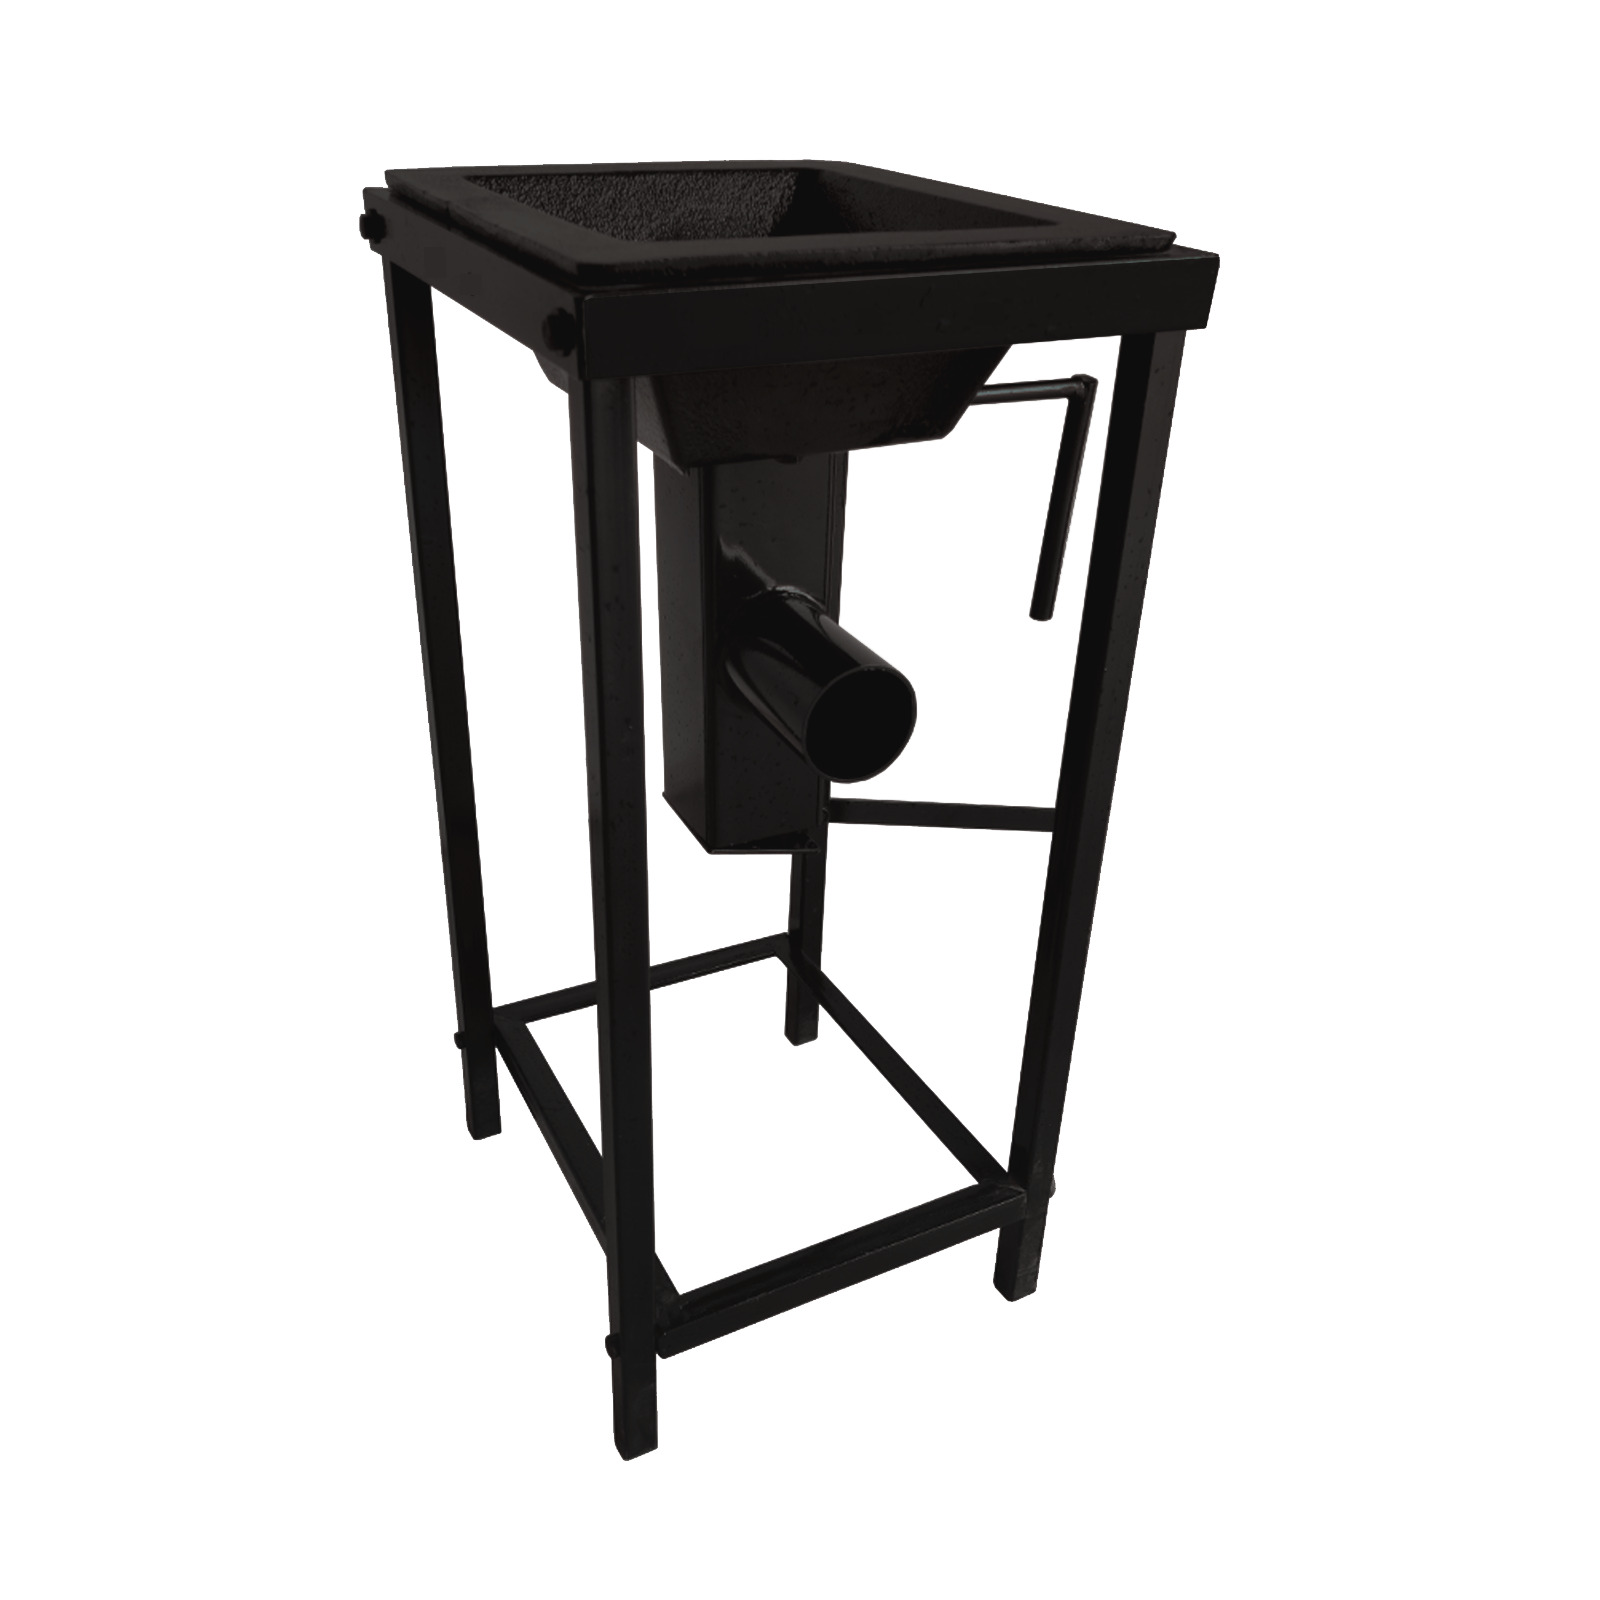 Blacksmith’s Welded Coal Firepot with Stand Blacksmith Coal Forge 10x12 inch